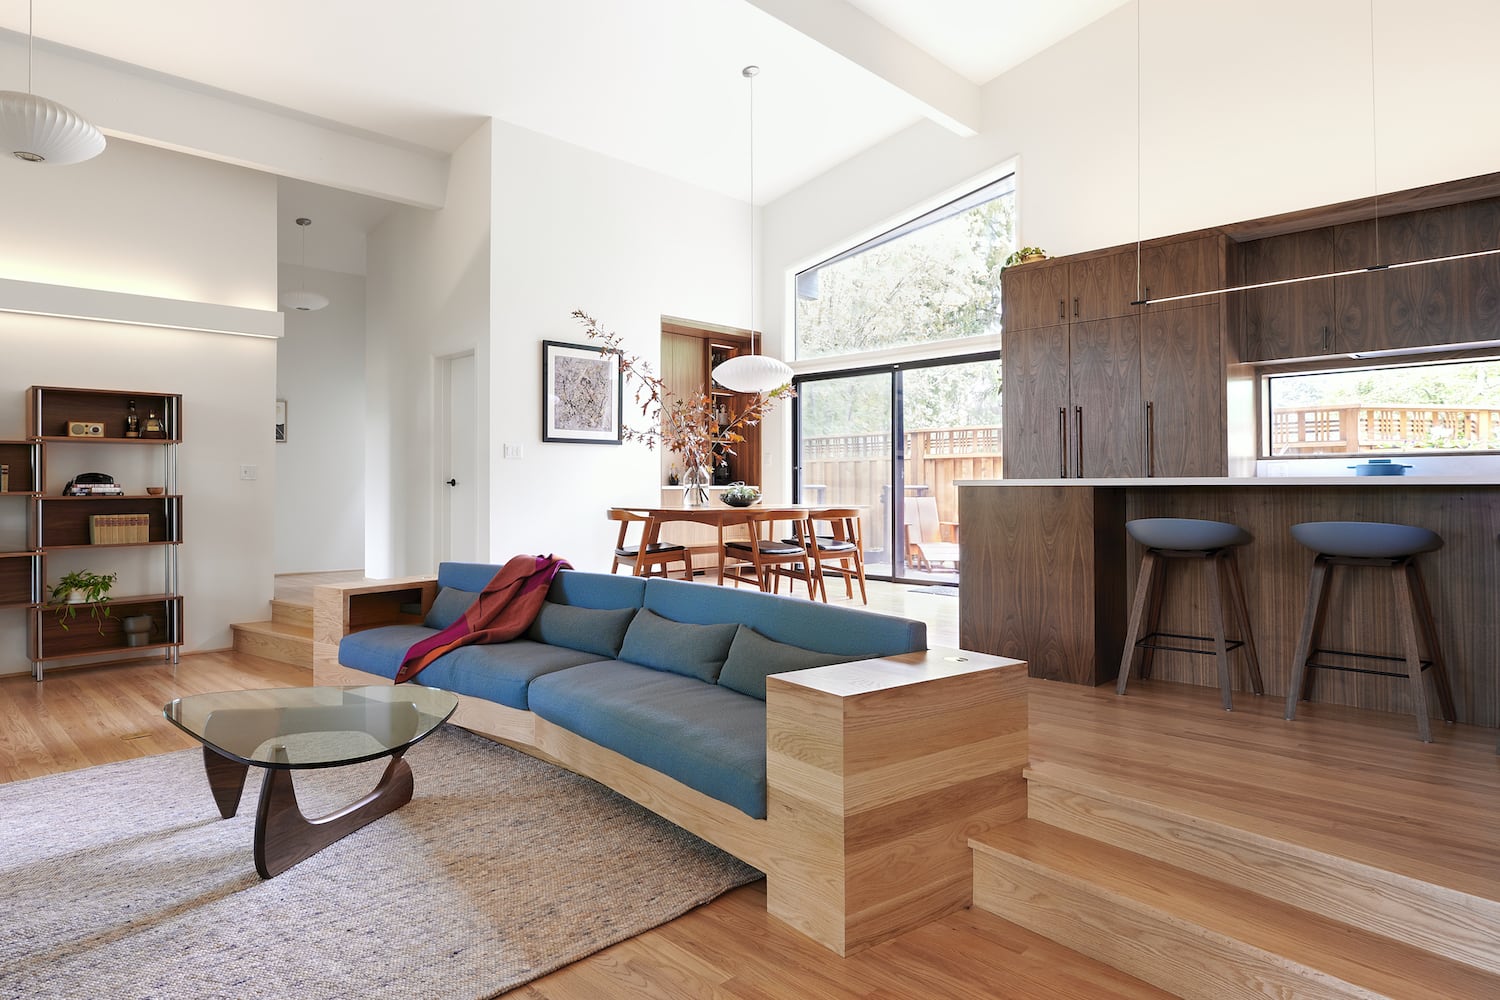 Midcentury living space with built-in sofa, indirect soffit lighting, wood floor